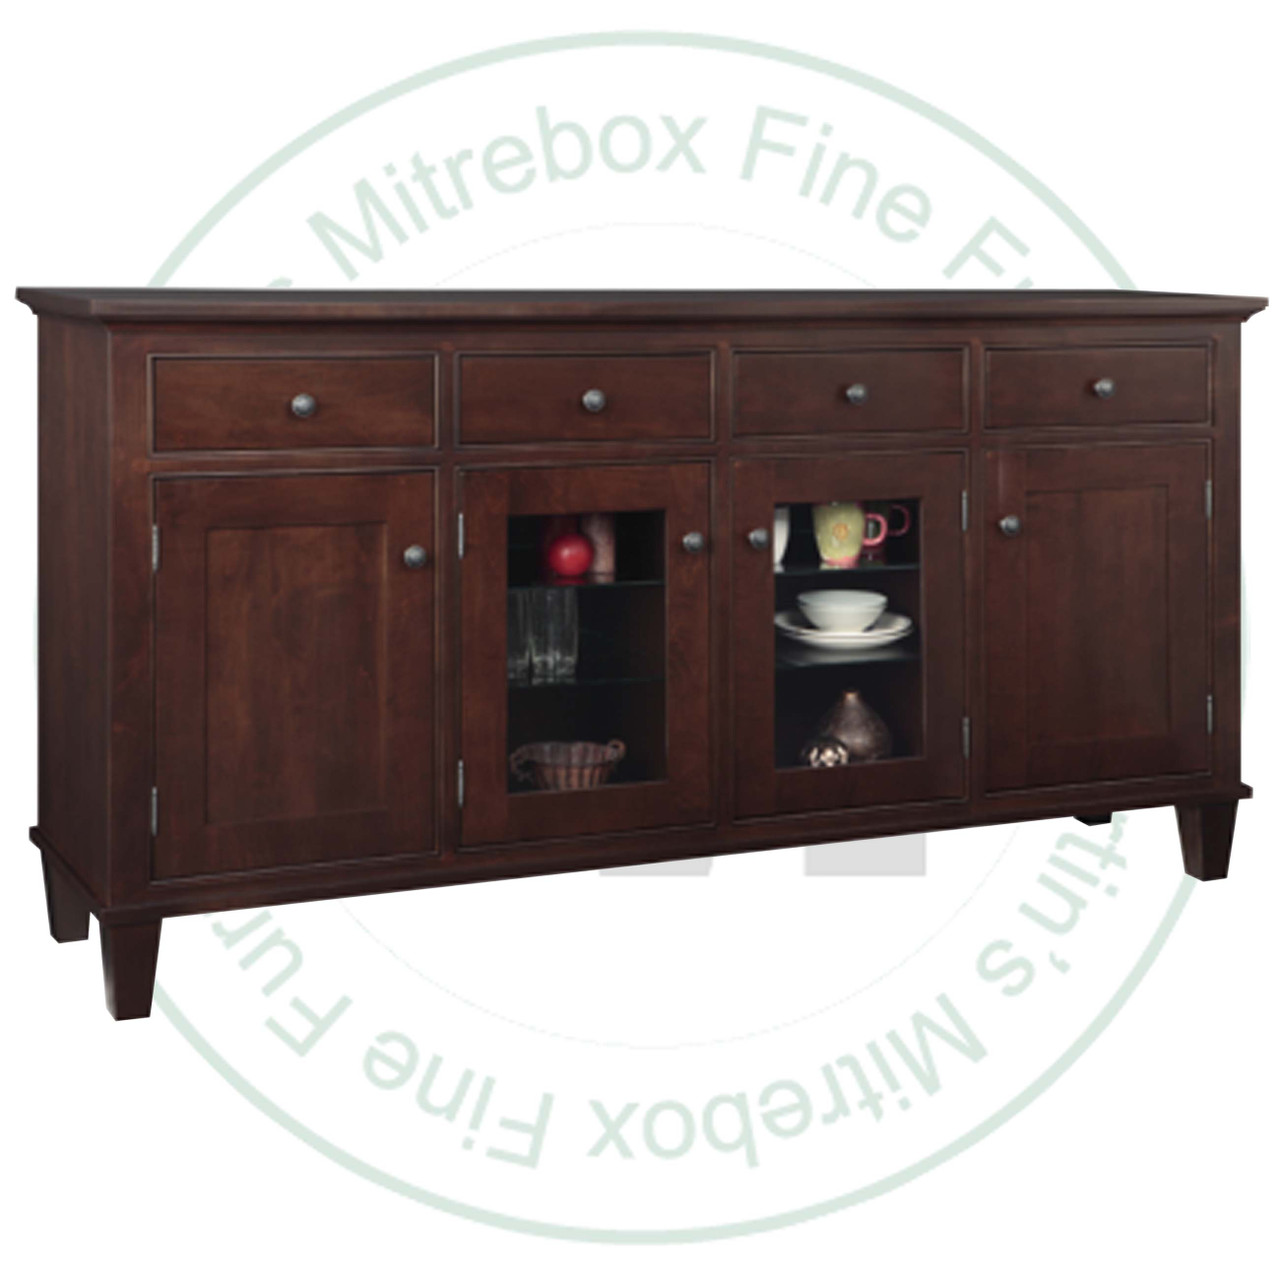 Maple Georgetown Sideboard 19.5'' Deep x 80'' Wide x 42'' High With 2 Glass Doors And 4 Drawers